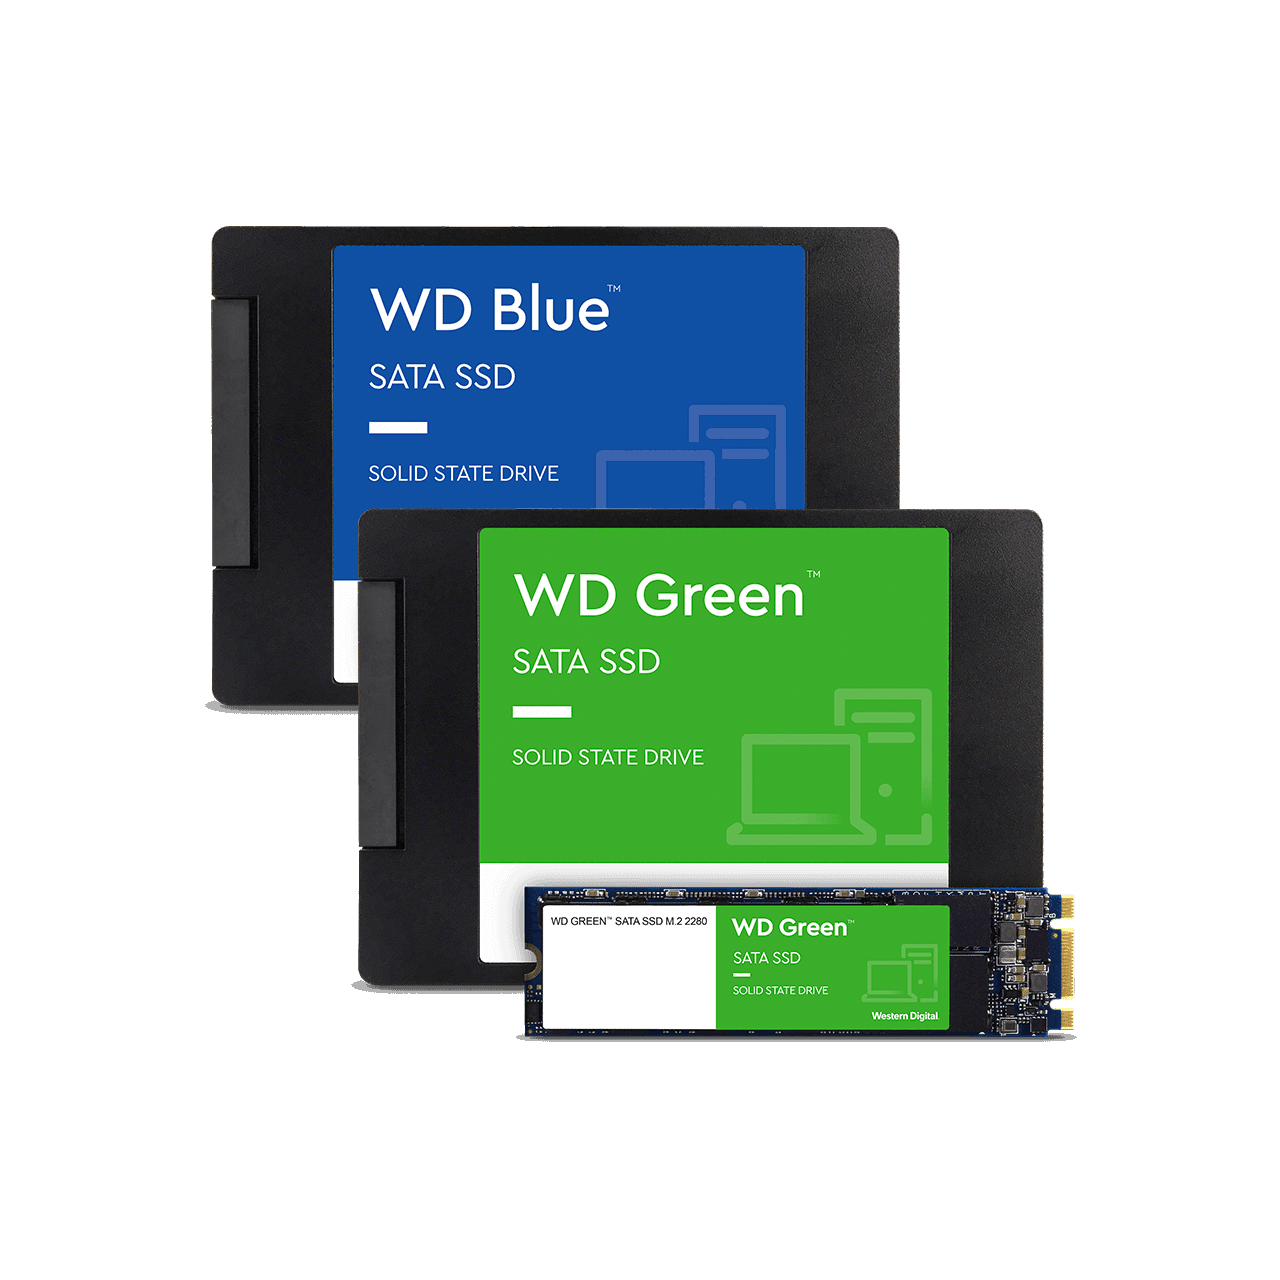 Product Portfolio and Resource Library | Western Digital